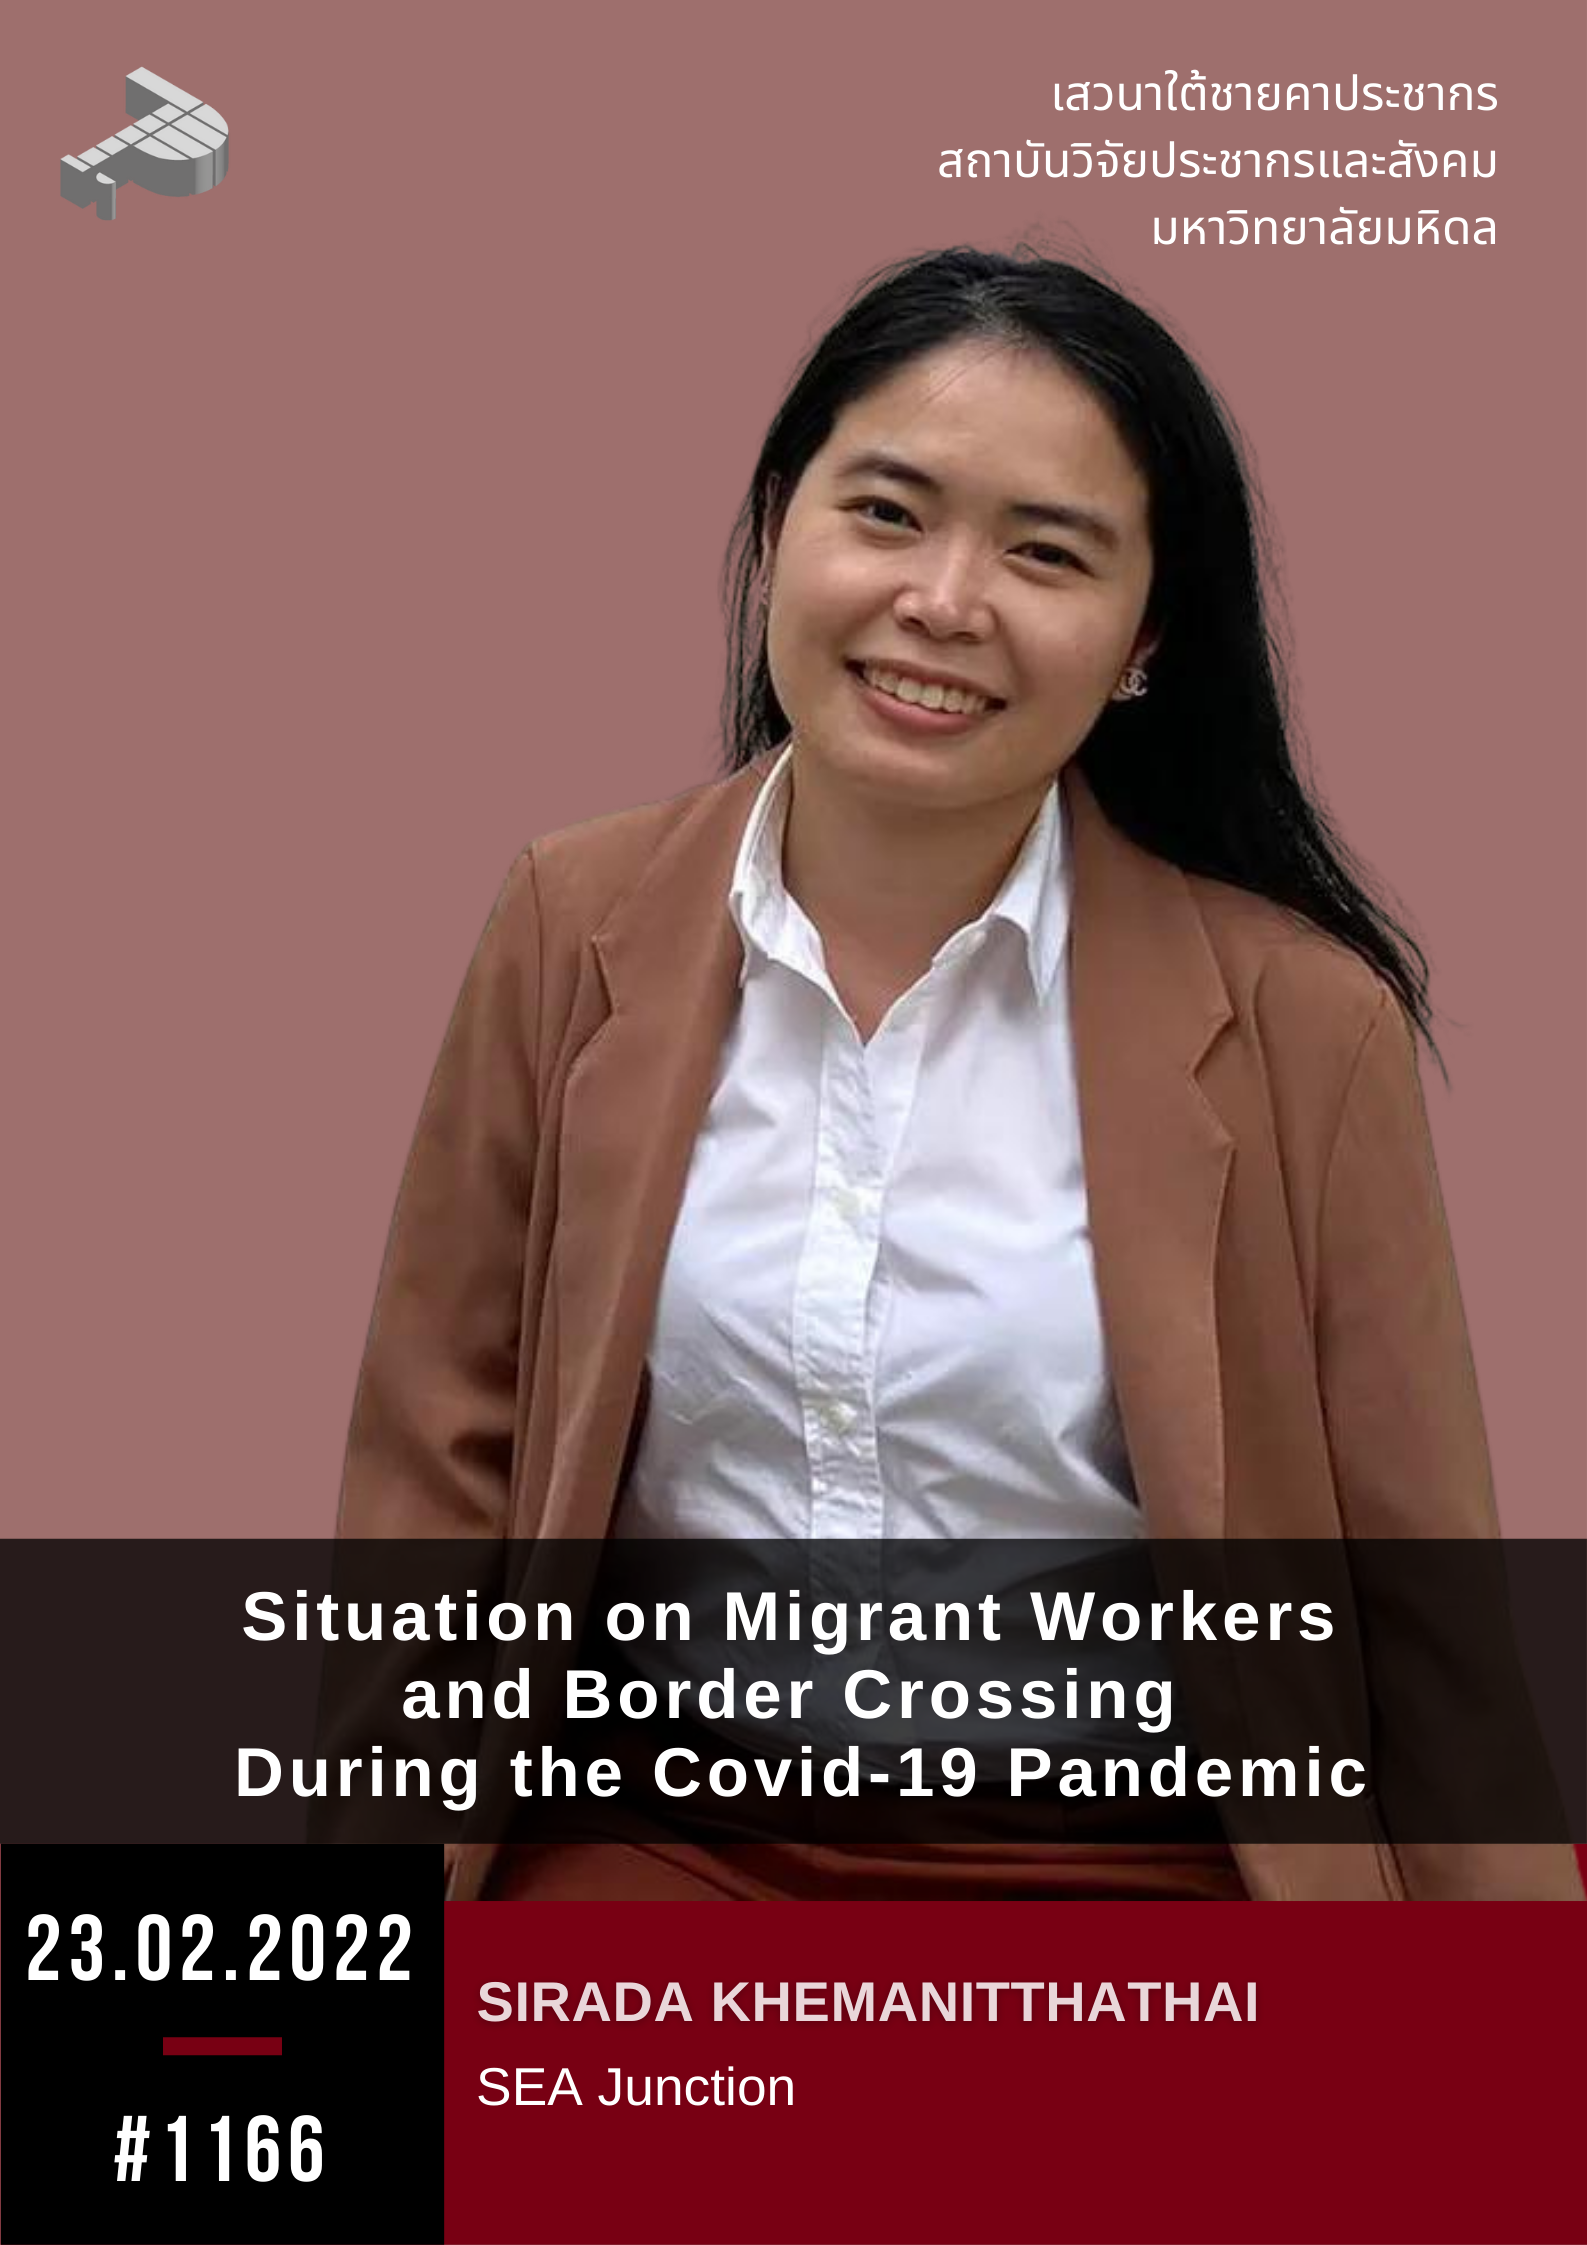 Situation on Migrant Workers and Border Crossing During the COVID-19 Pandemic